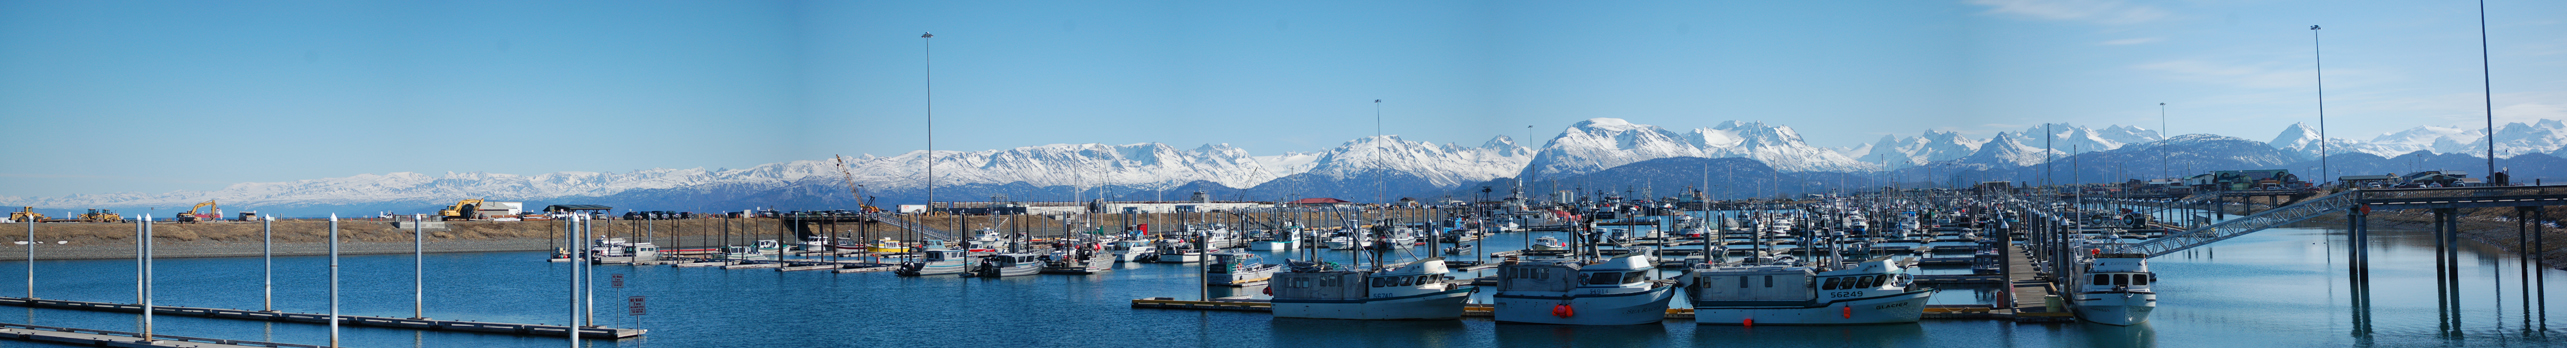 Homer’s port and harbor have been removed from the Kachemak Bay Critical Habitat Area. “In a nutshell (Senate Bill) 148 is about recognizing the balance between jobs and environmental protection,” said the bill’s sponsor, Sen. Peter Micciche, R-Soldotna.-Photo by Michael Armstrong, Homer News